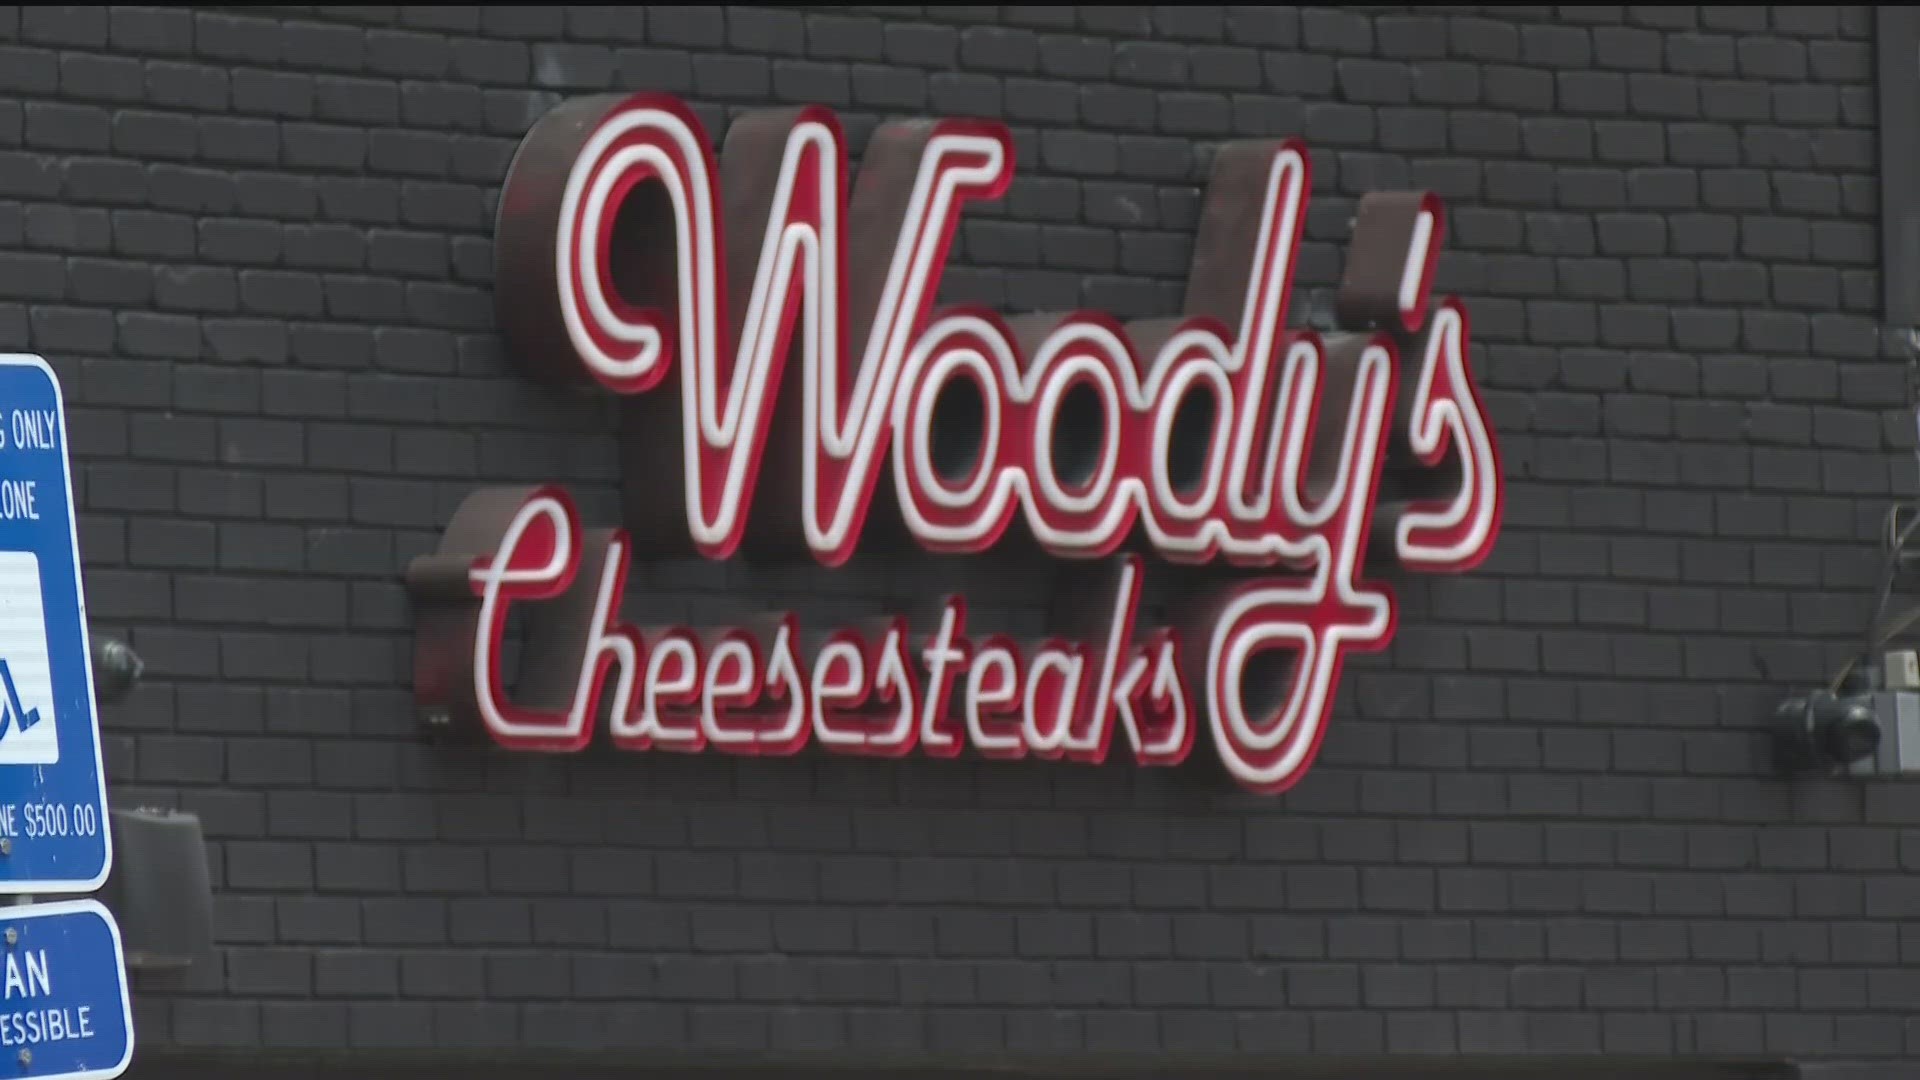 Darlene McCoy Jackson, who is part of the Praise 103 team,  shared her experience at Woody's Cheesesteaks on Irby Avenue in an Instagram live video.